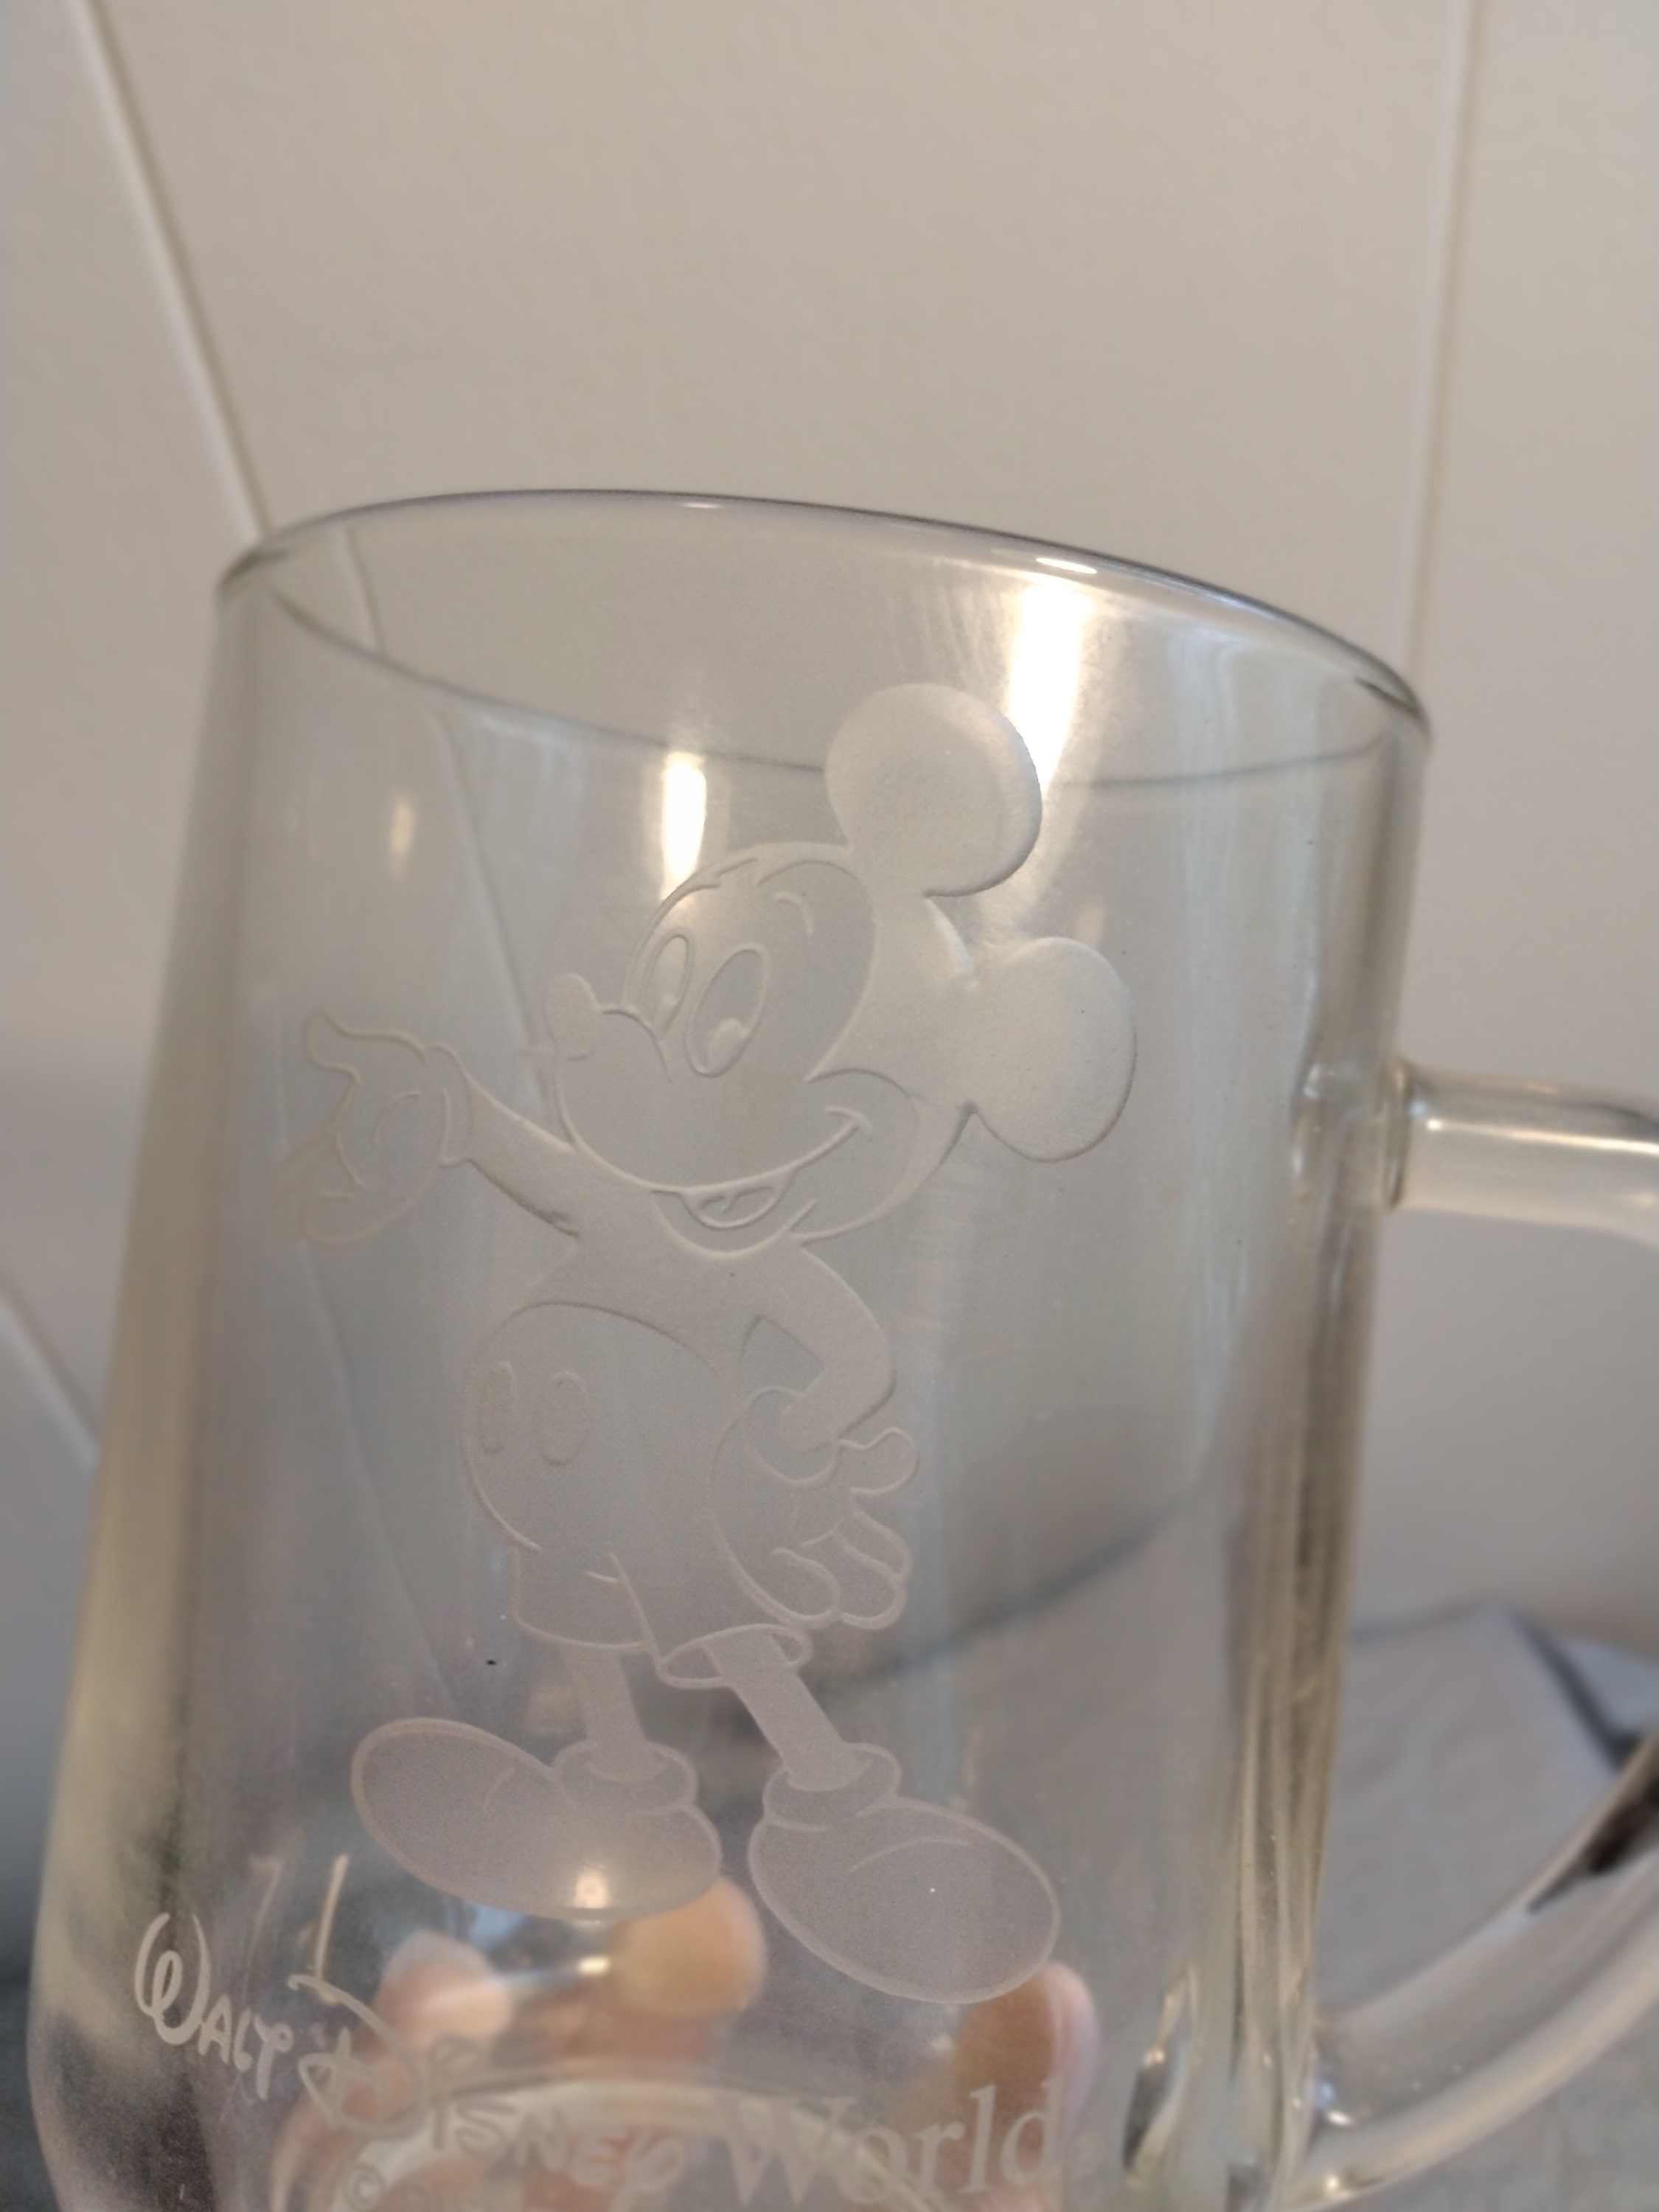 Never Grow up Mickey Mouse Can Shaped Glass With Vinyl Design and